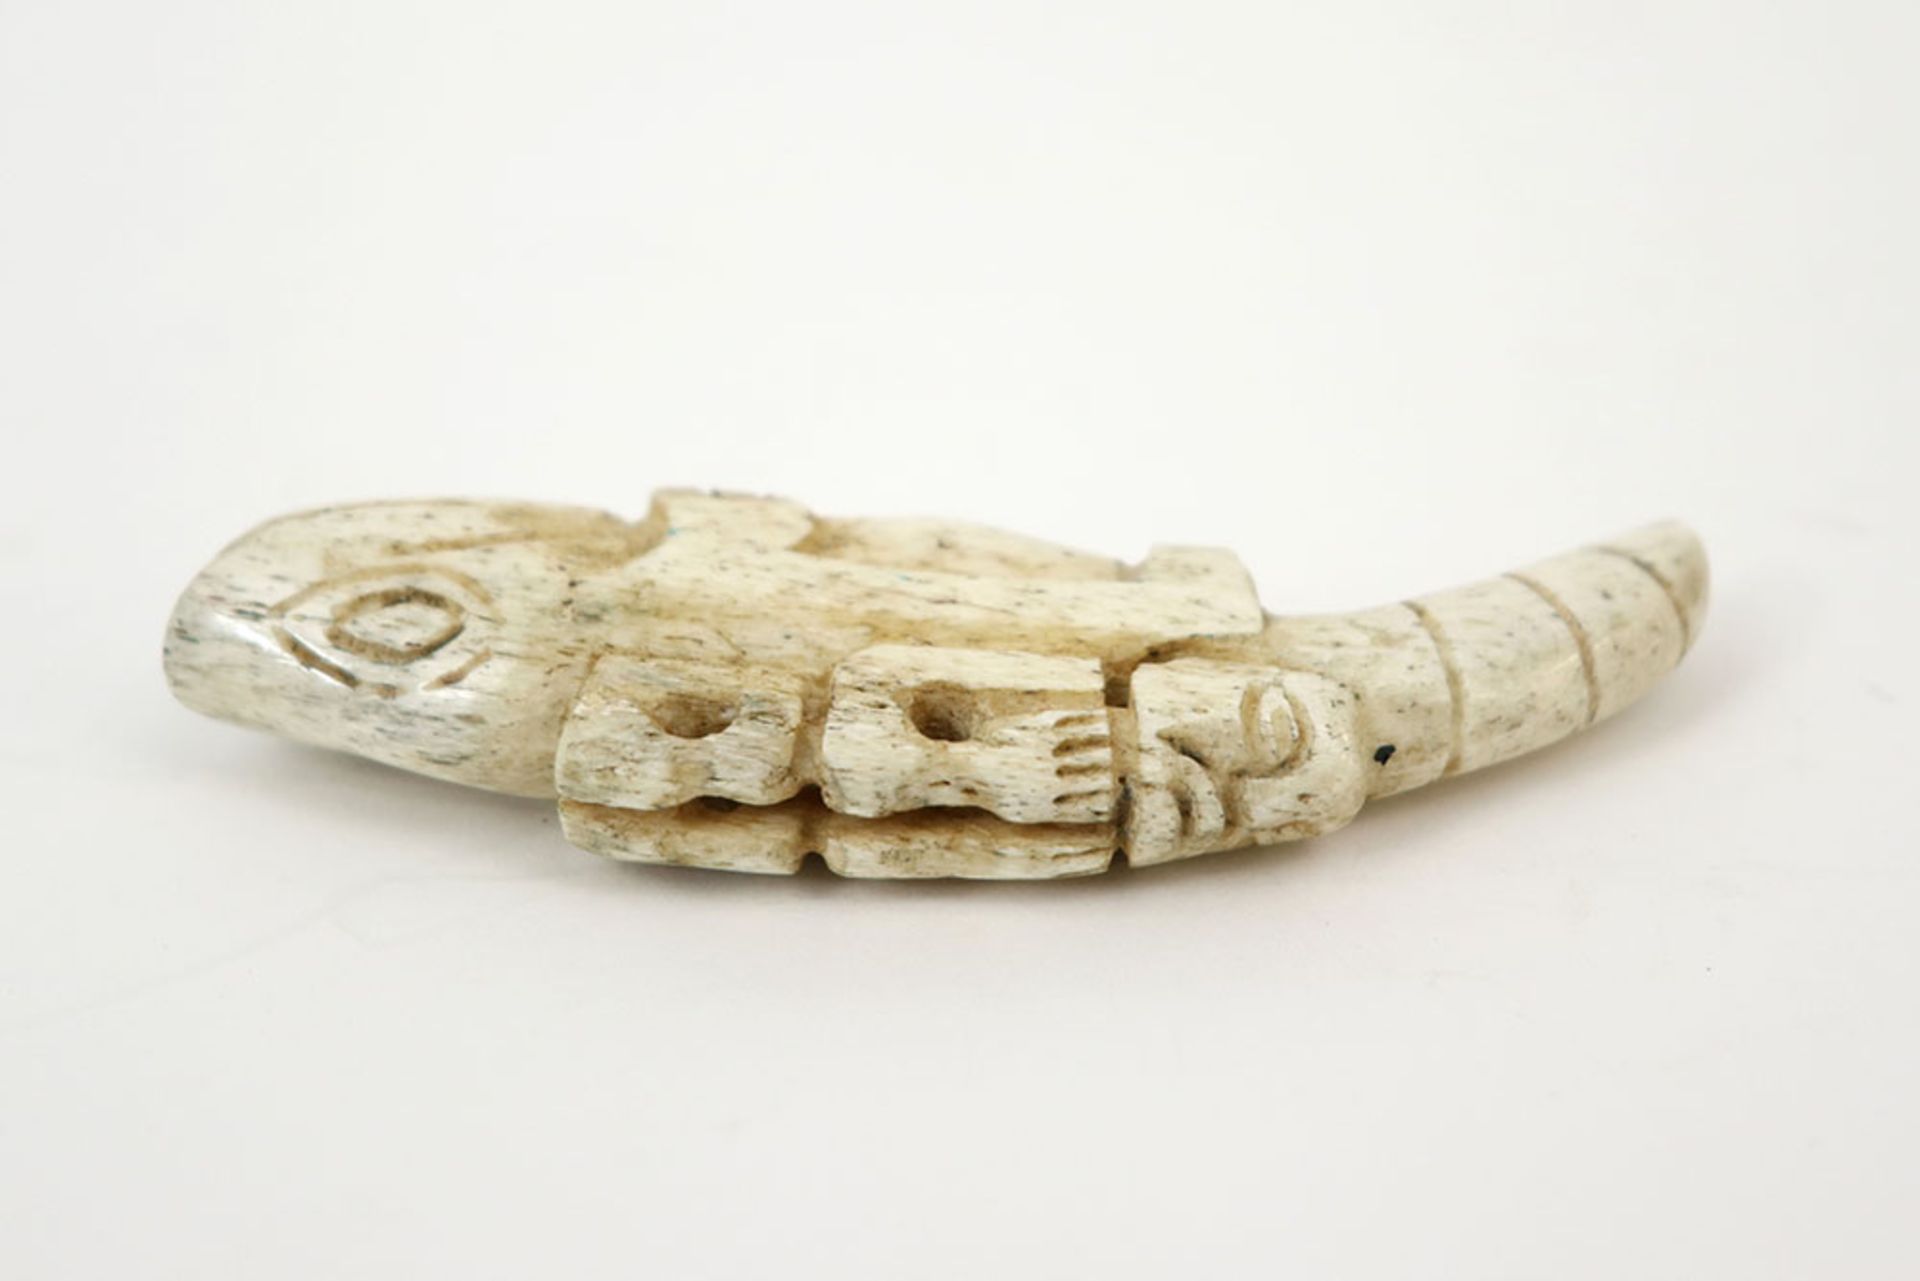 20th Cent. North West American Tlingit sculpture/sharm in cetacean bone with the typical - Image 3 of 4